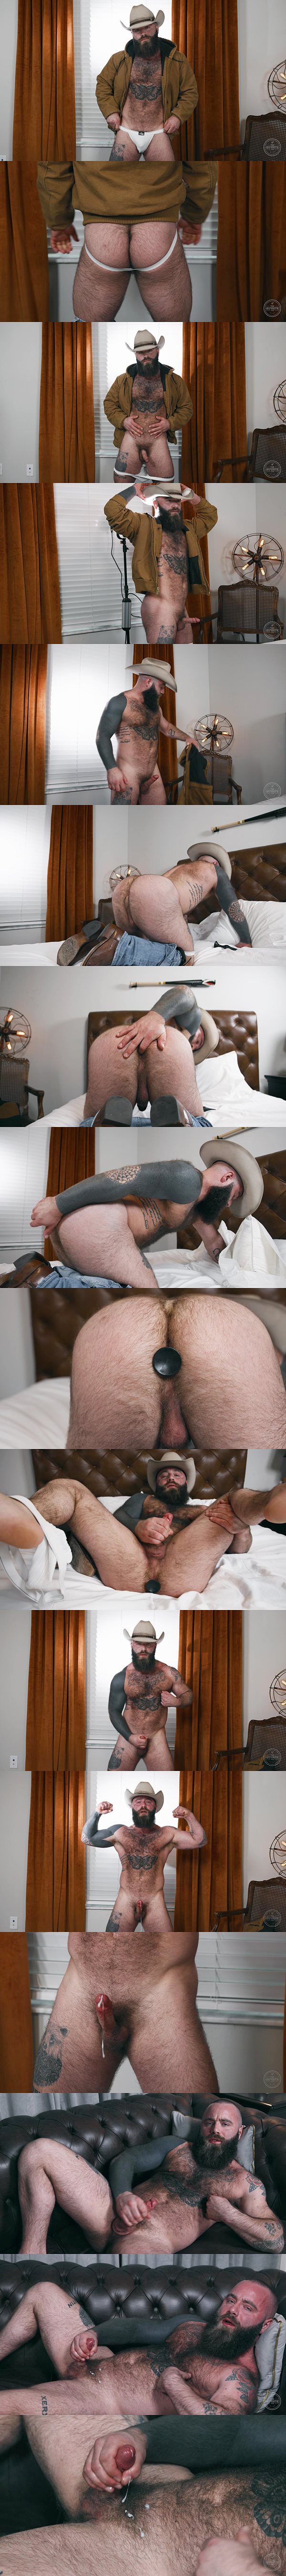 Gay porn newcomer, hairy inked stud Baby Bear fingers and dildo-fucks himself until he blows two creamy loads at The Guy Site